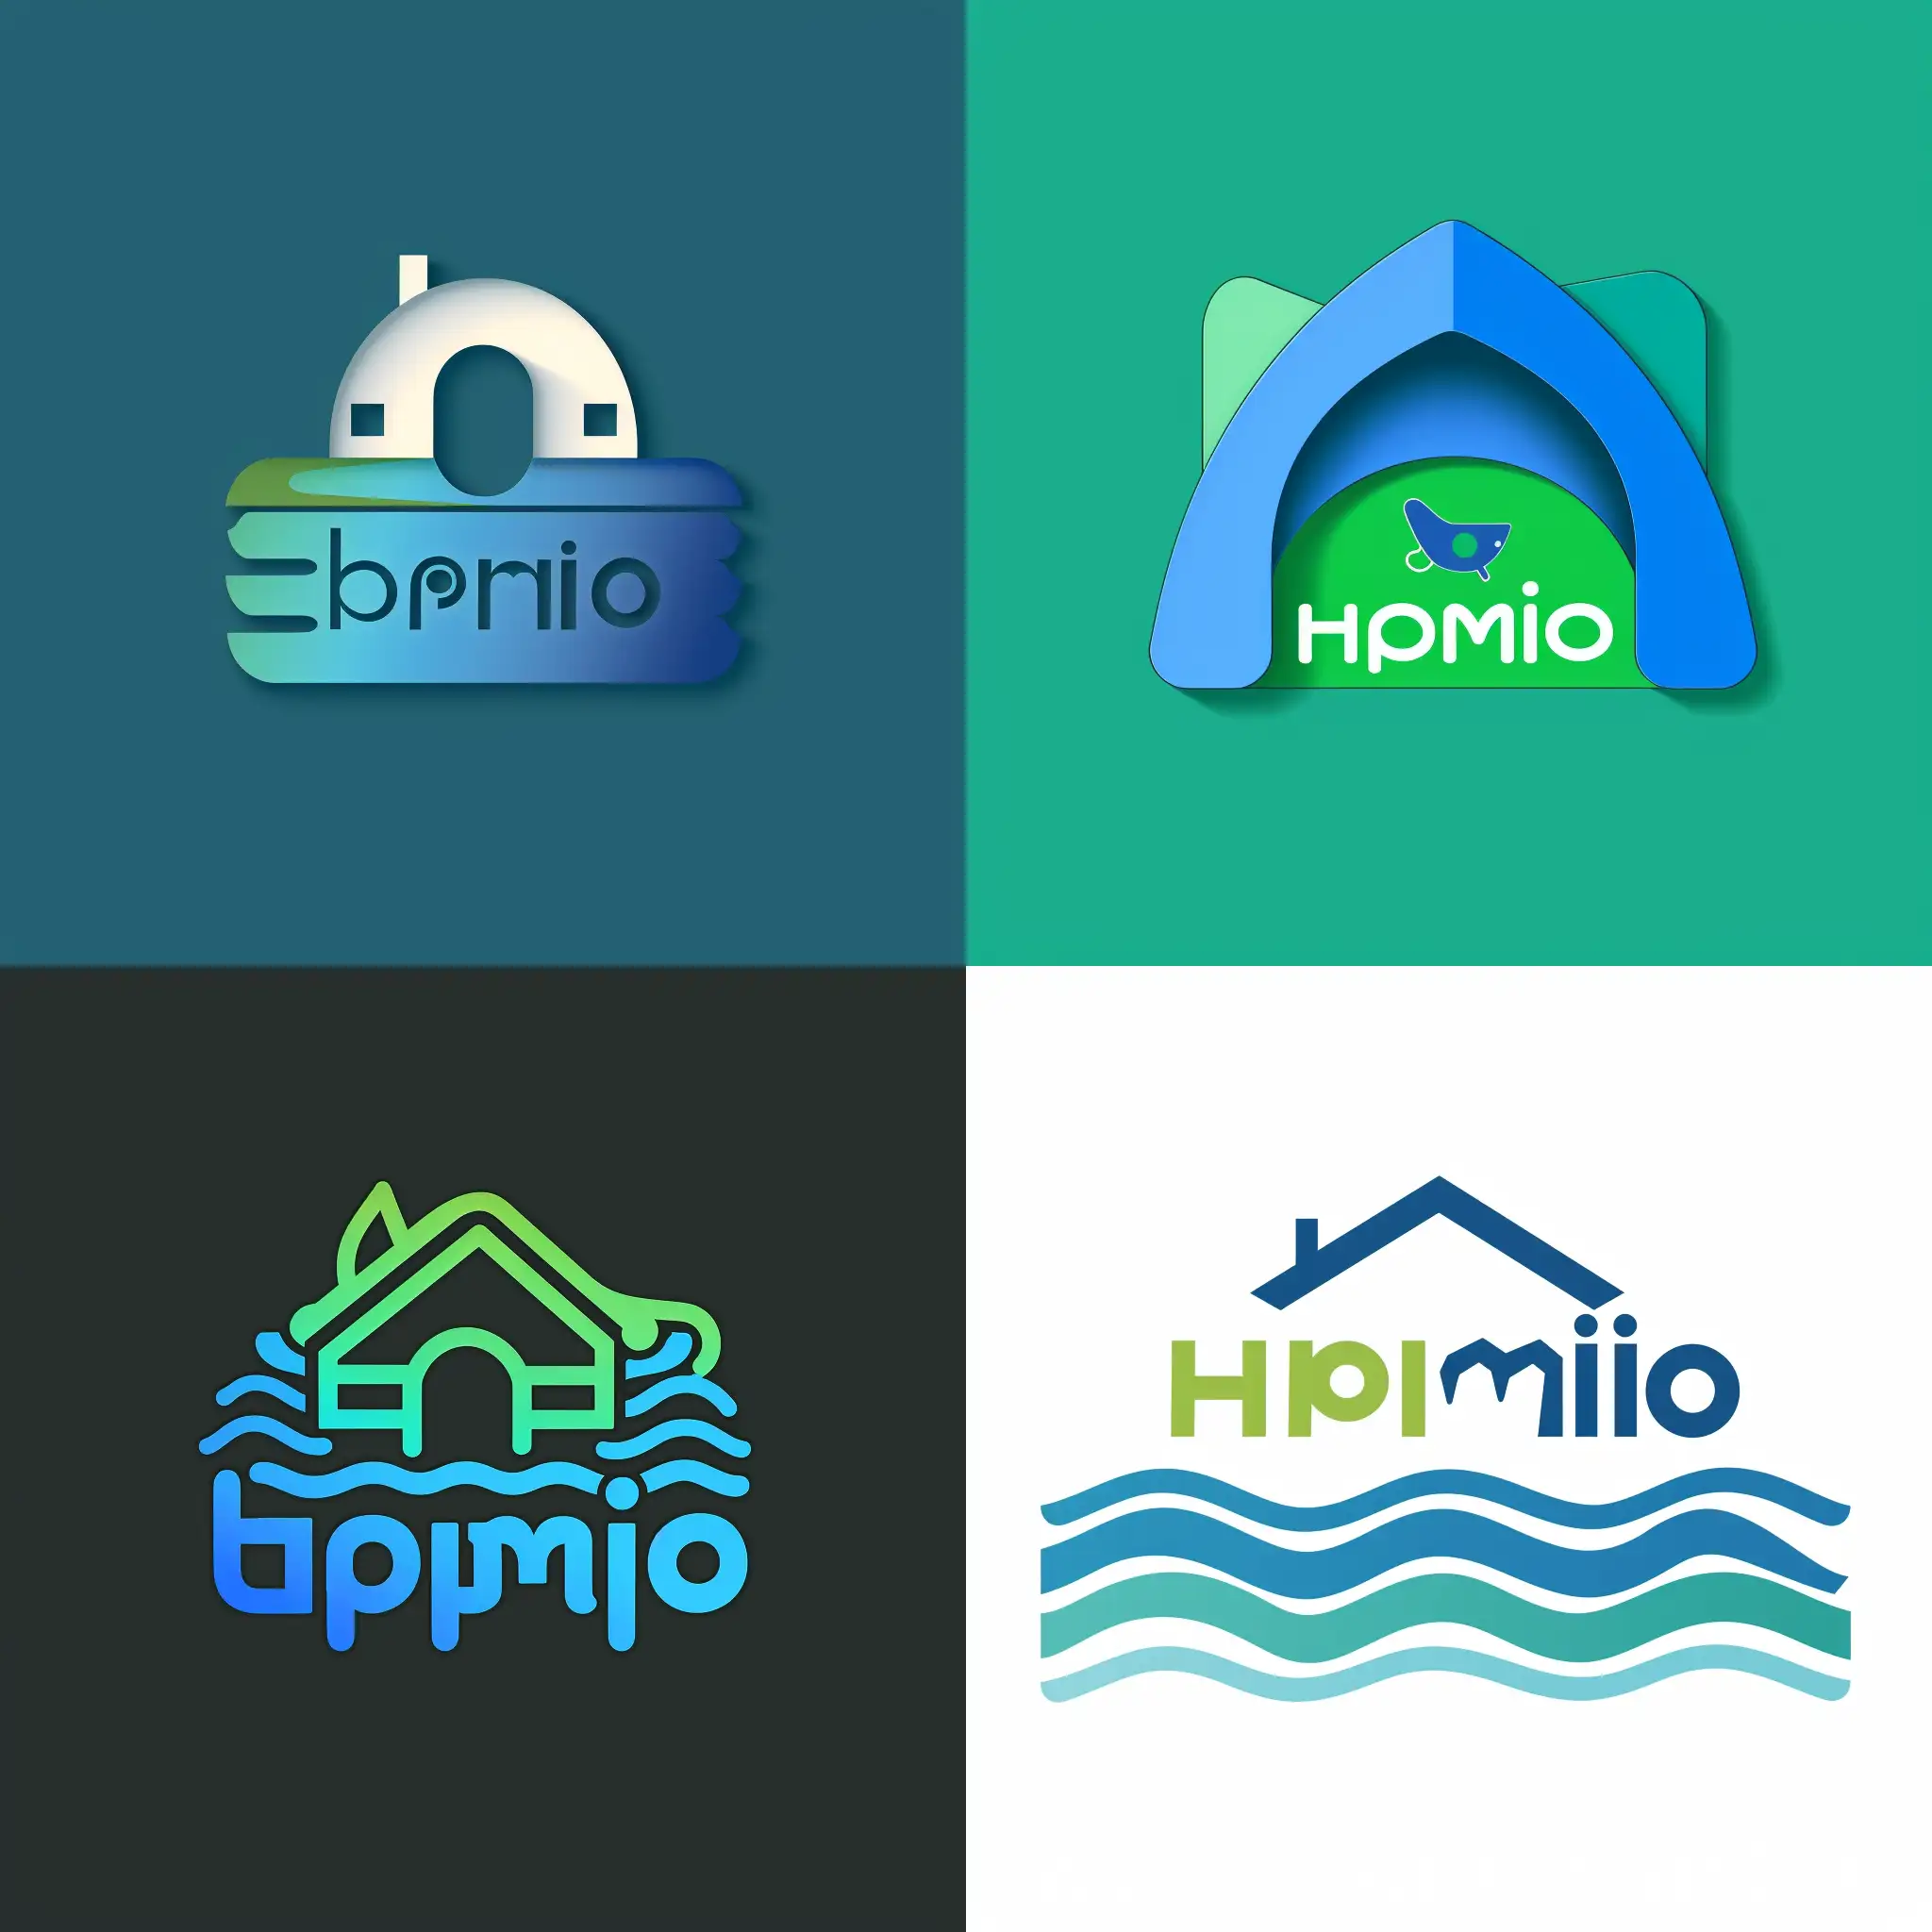 Design a logo " Hopmio", that's about pet house for Cats and Dogs, modern Typography, Blue and ocean Green color